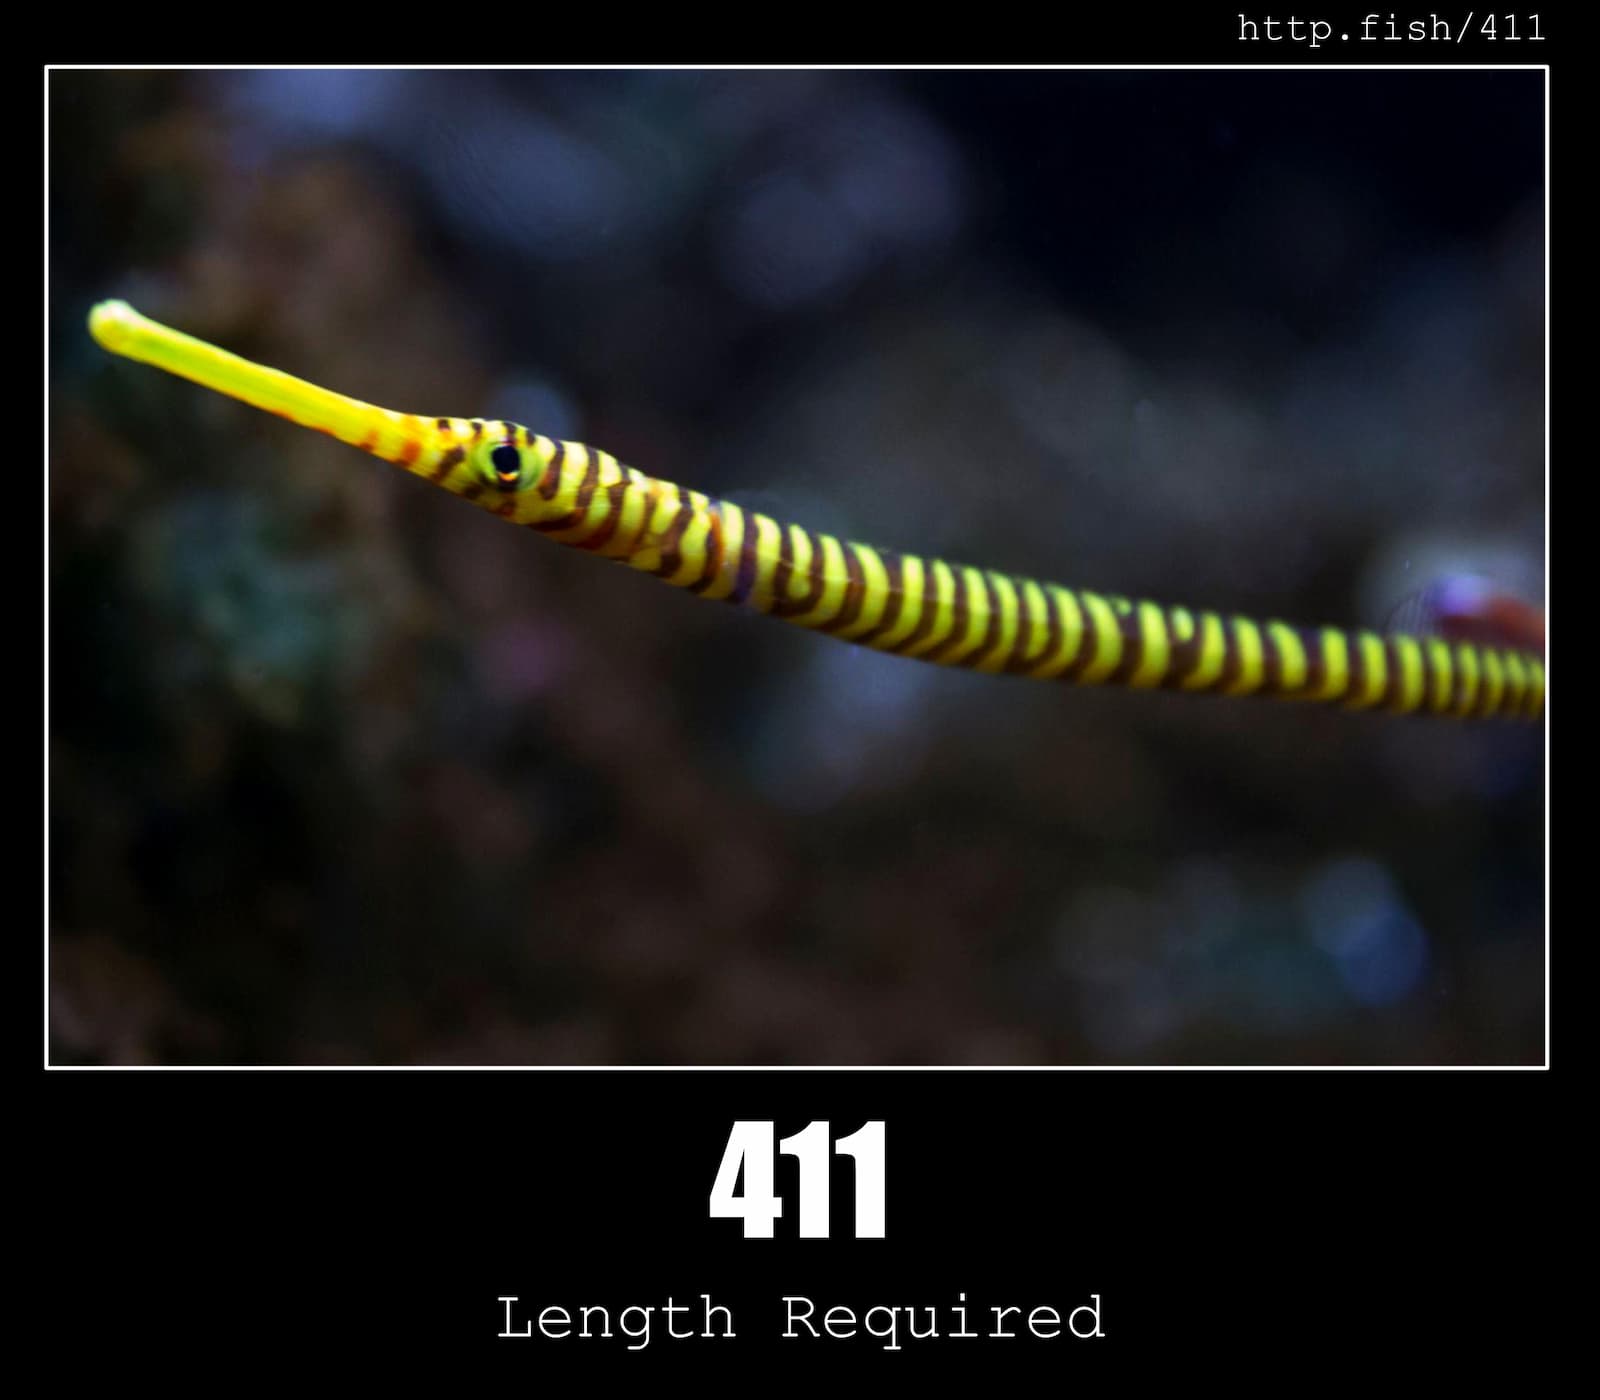 HTTP Status Code 411 Length Required & Fish